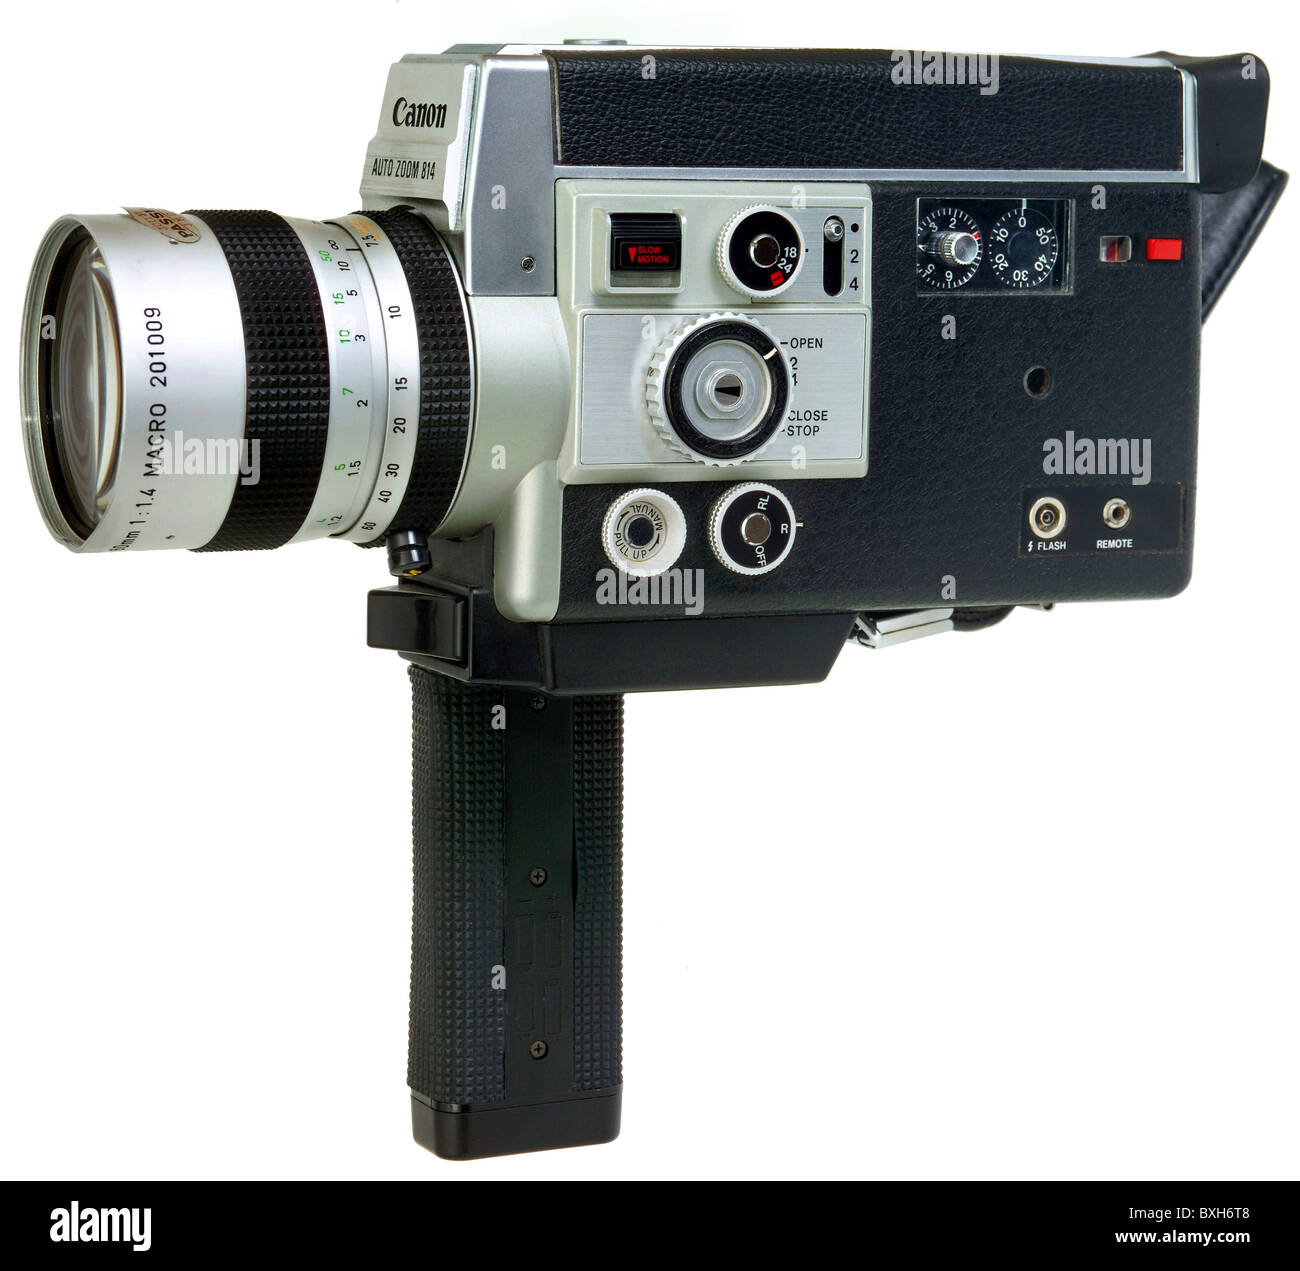 electronics, filming, Canon autozoom 814 Electronic, Super 8 camera, Japan, 1972, Additional-Rights-Clearences-Not Available Stock Photo